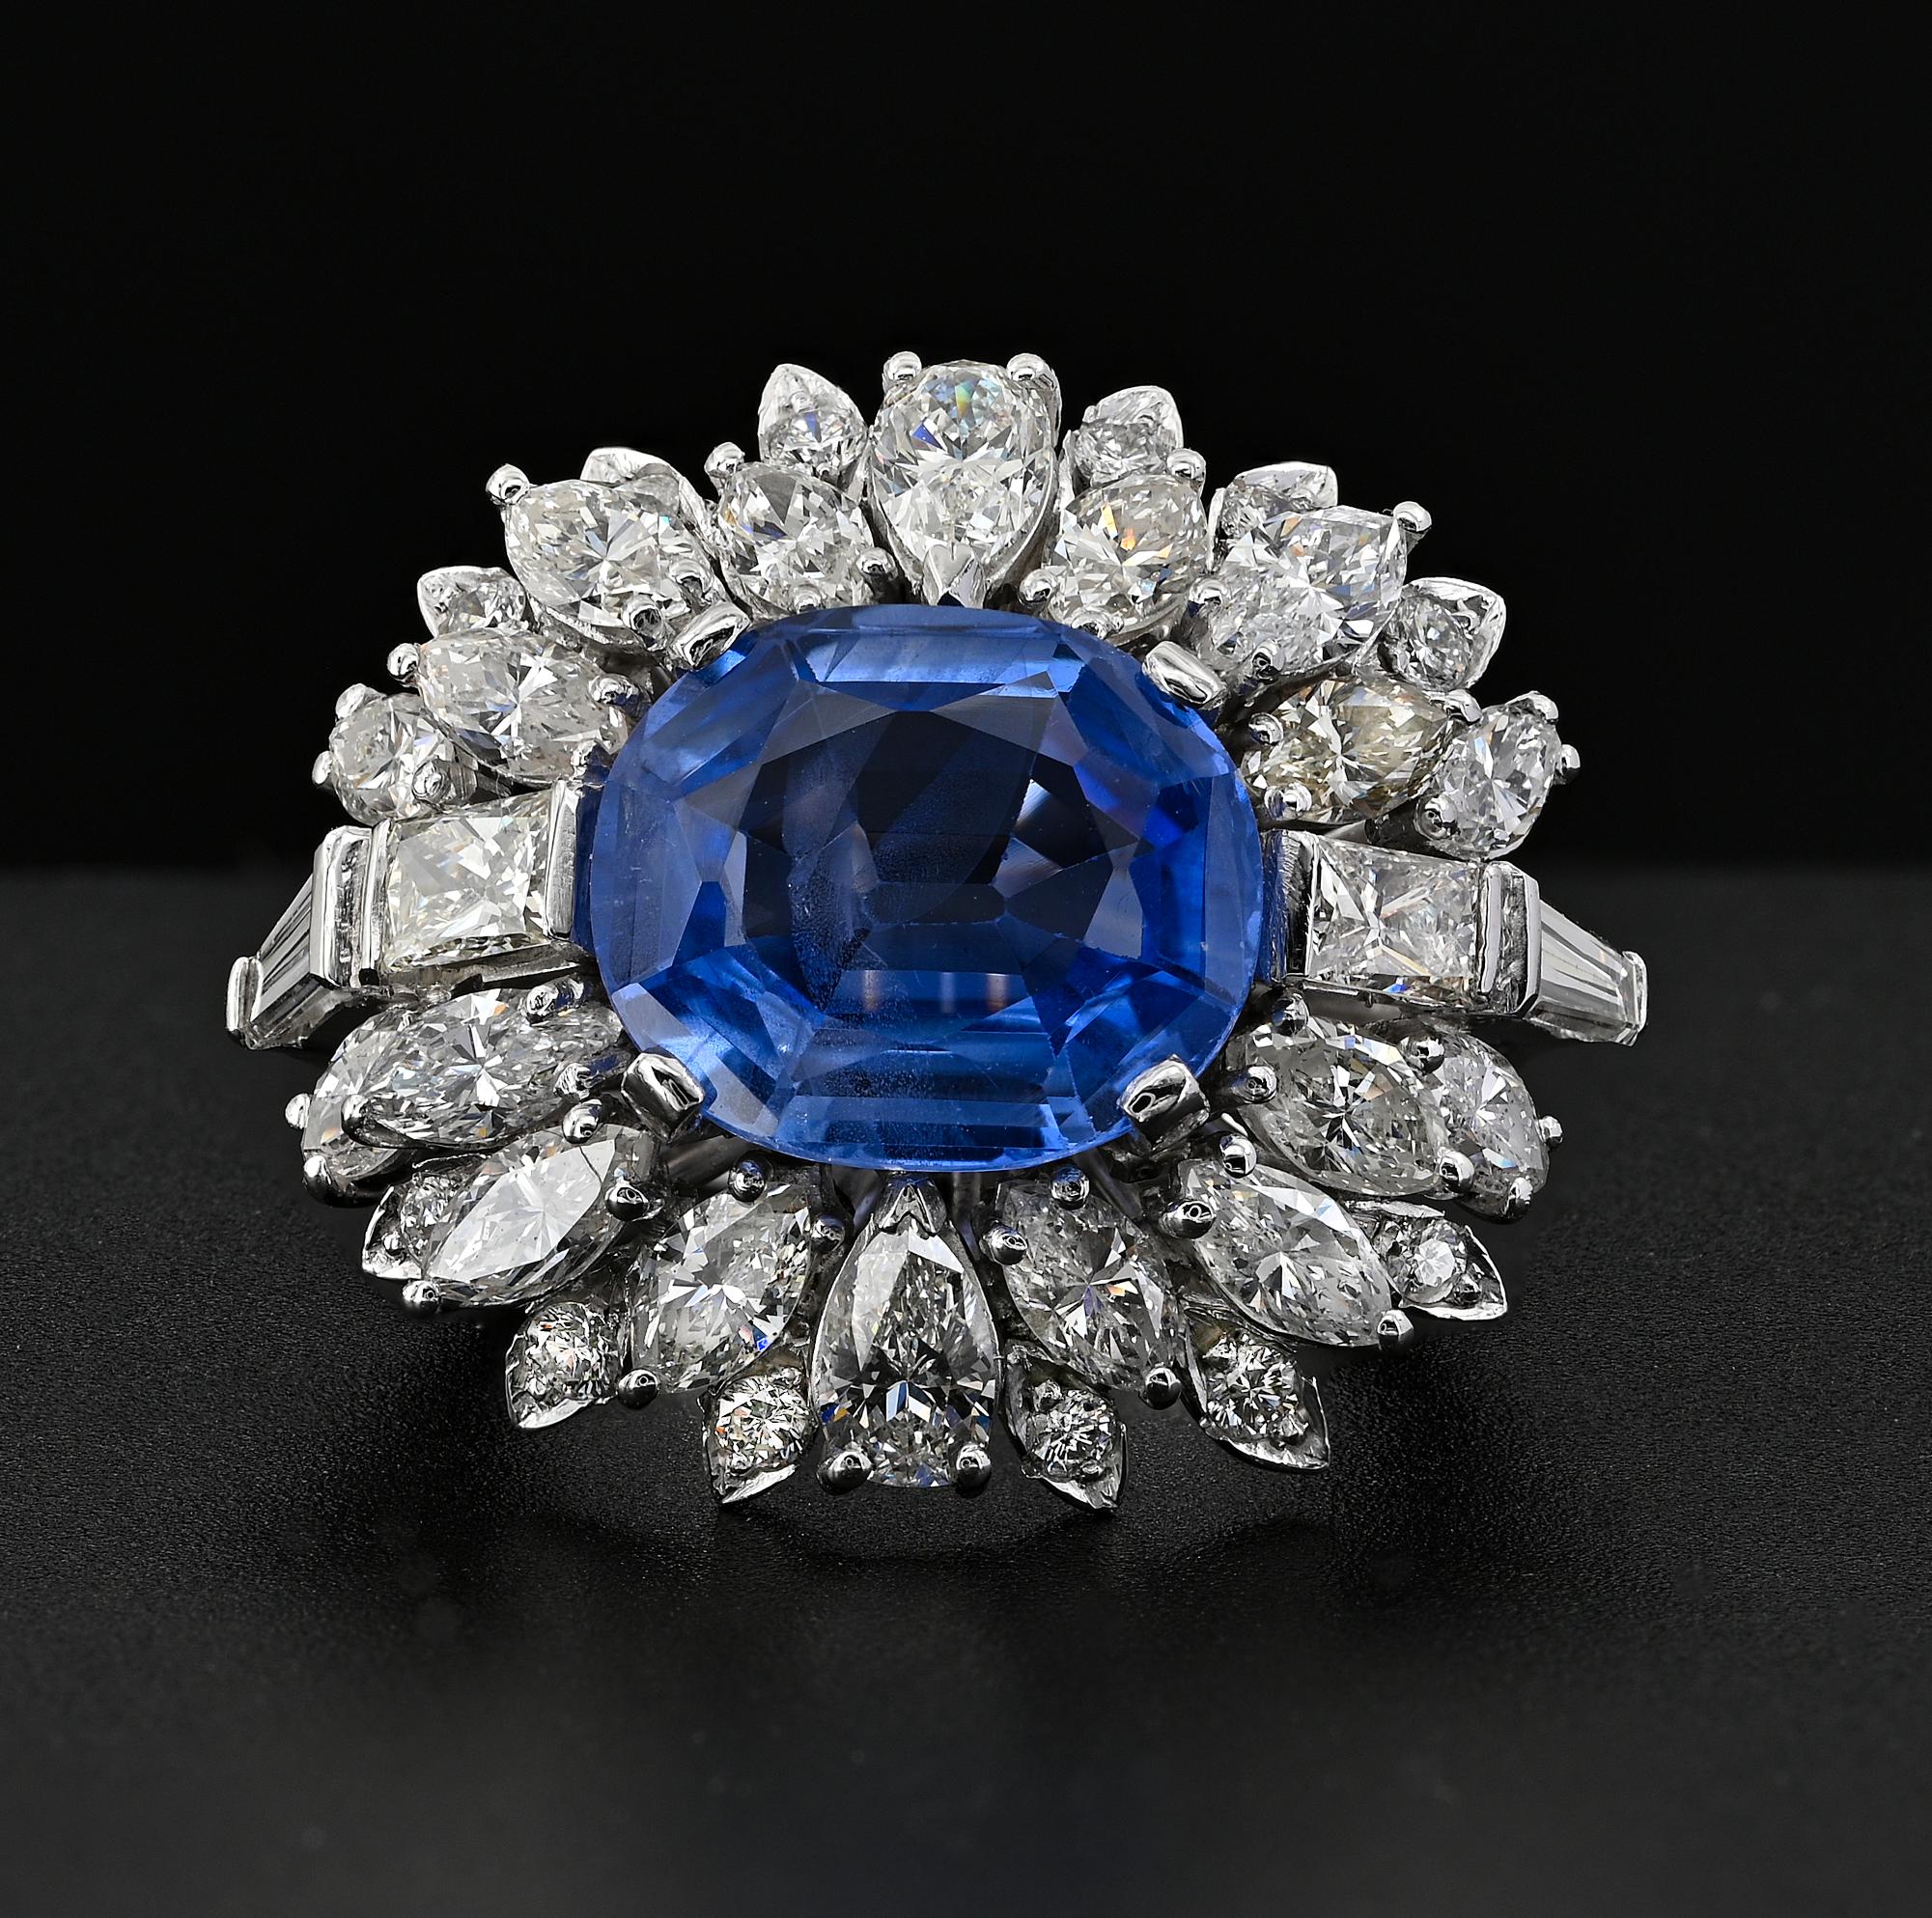 An impressive Diamond and sapphire cocktail ring.
Large crown beautifully designed and hand crafted of Platinum during the 60’s.
Boasting a magnificent 7.46 Ct Natural no heat Sapphire Ceylon origin – fully certified by GCS London. Stunning corn